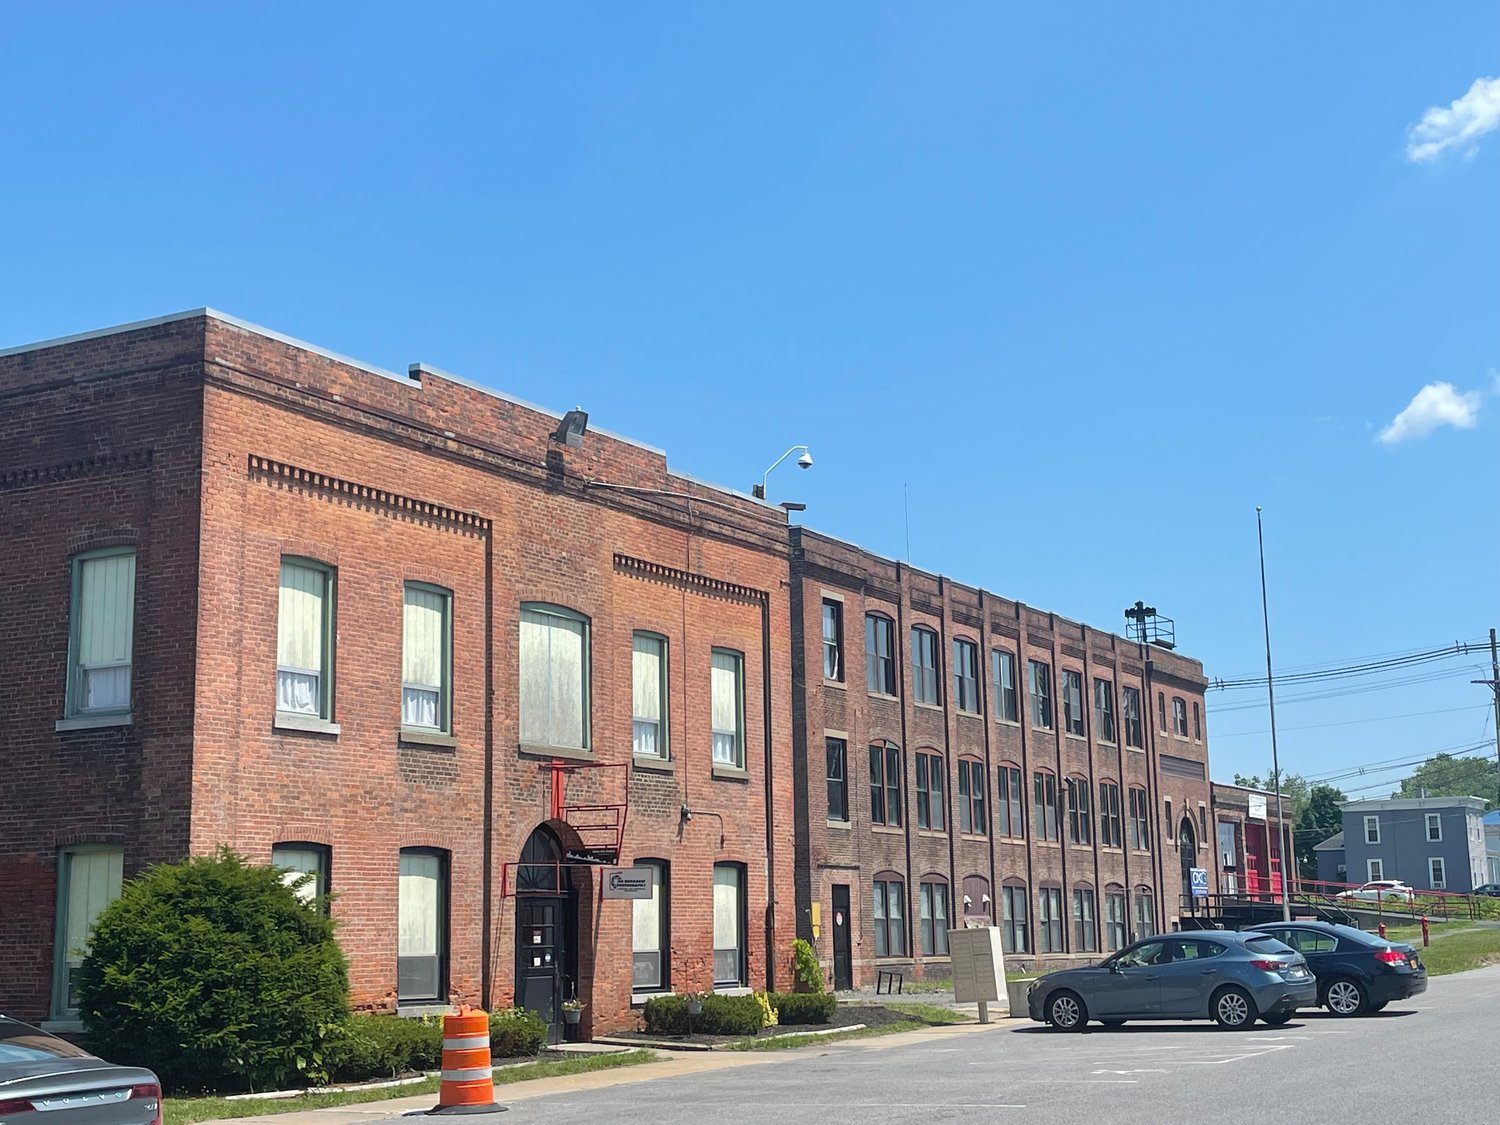 The Oneida Limited factory as it sits today. These buildings housed manufacturing offices and labs. The near building is presently leased on the first floor to a financial planner and a photographer.